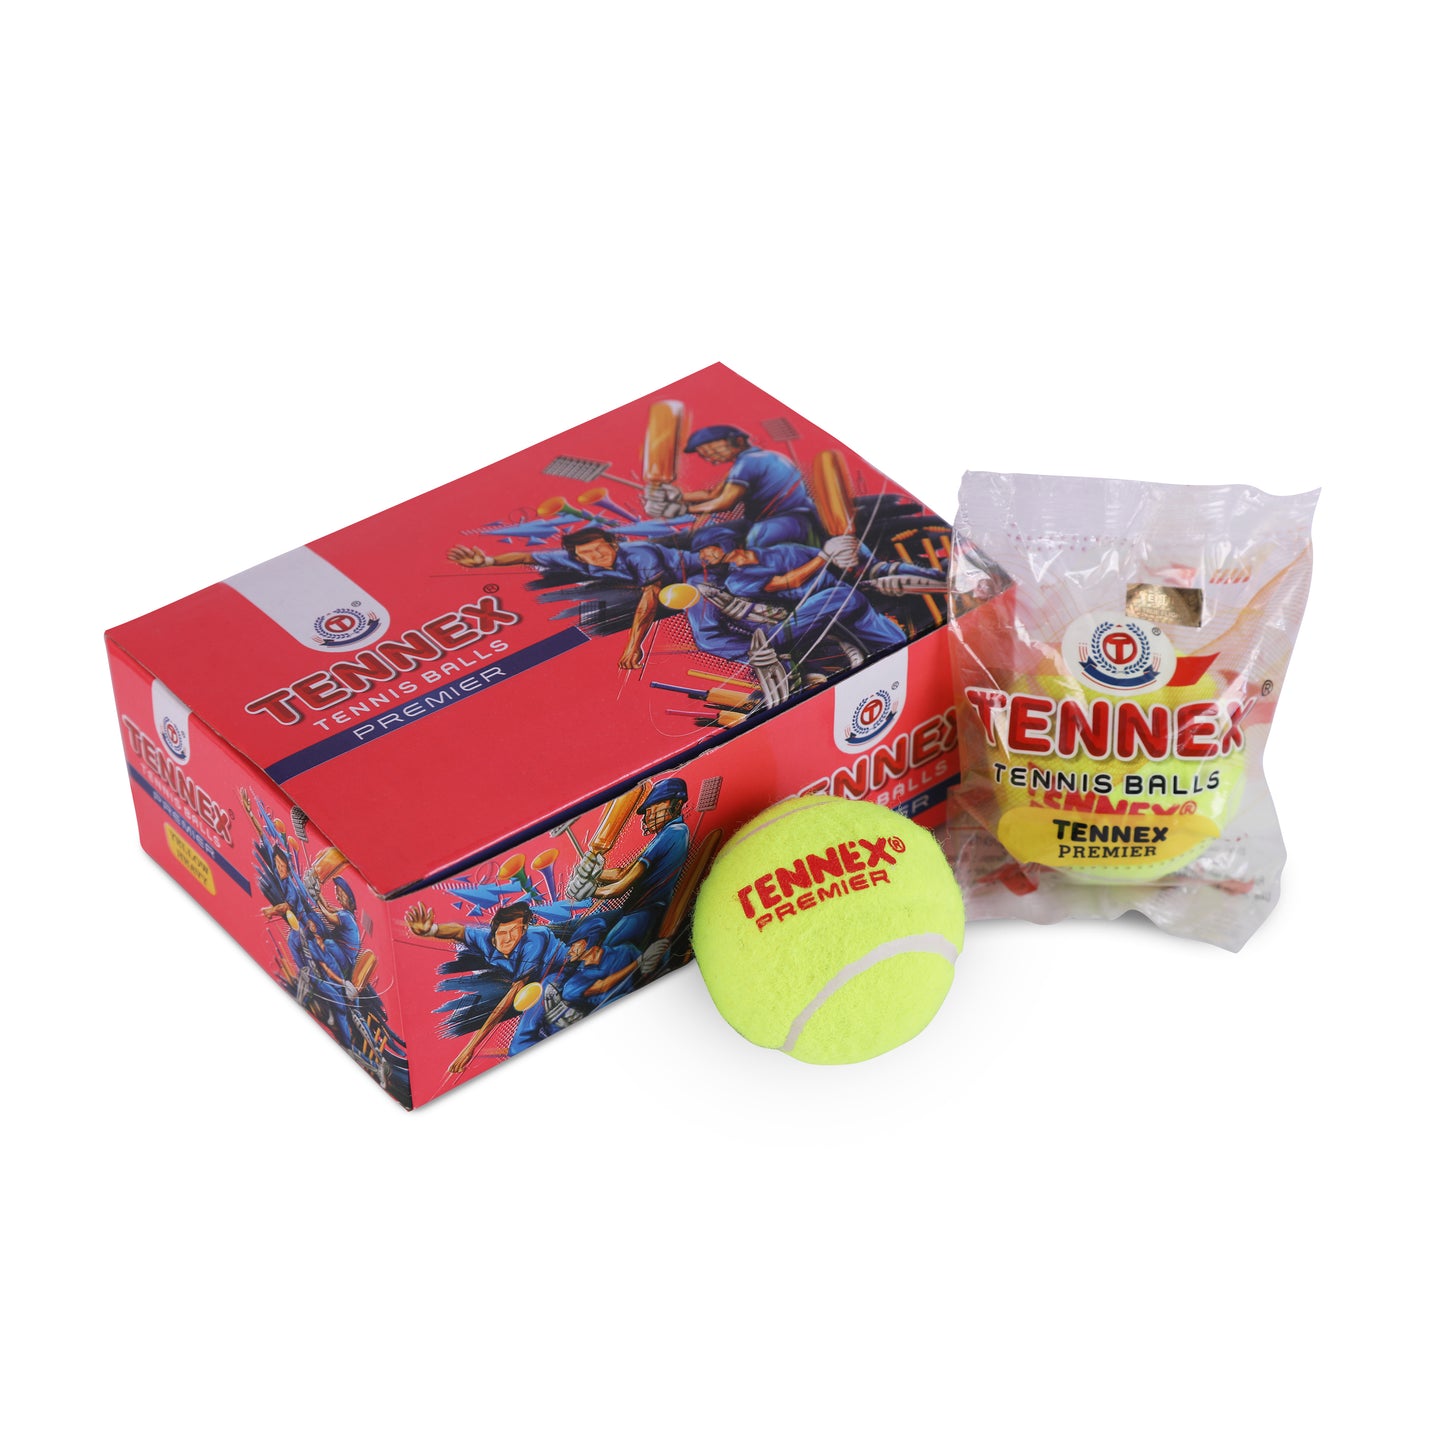 Cricket Tennis Ball Premier Heavy Weight (Pack of 6) - Small Ground Overarm